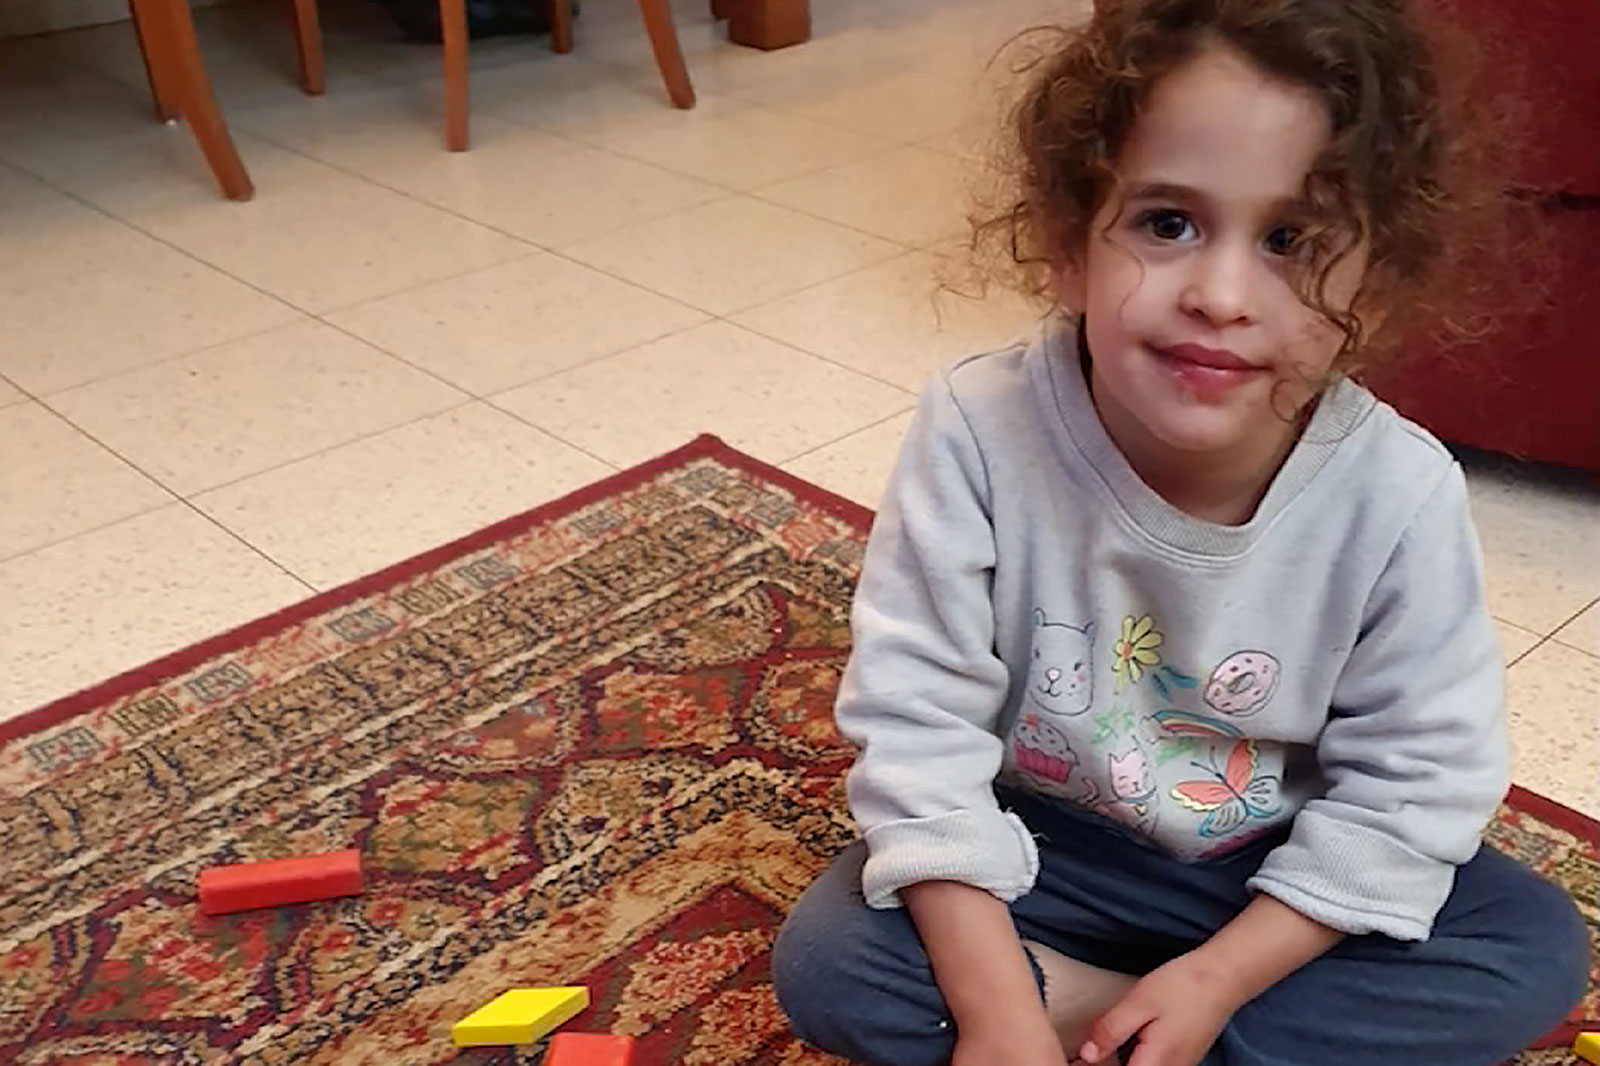 Abigail Edan, 3, is the youngest American hostage.